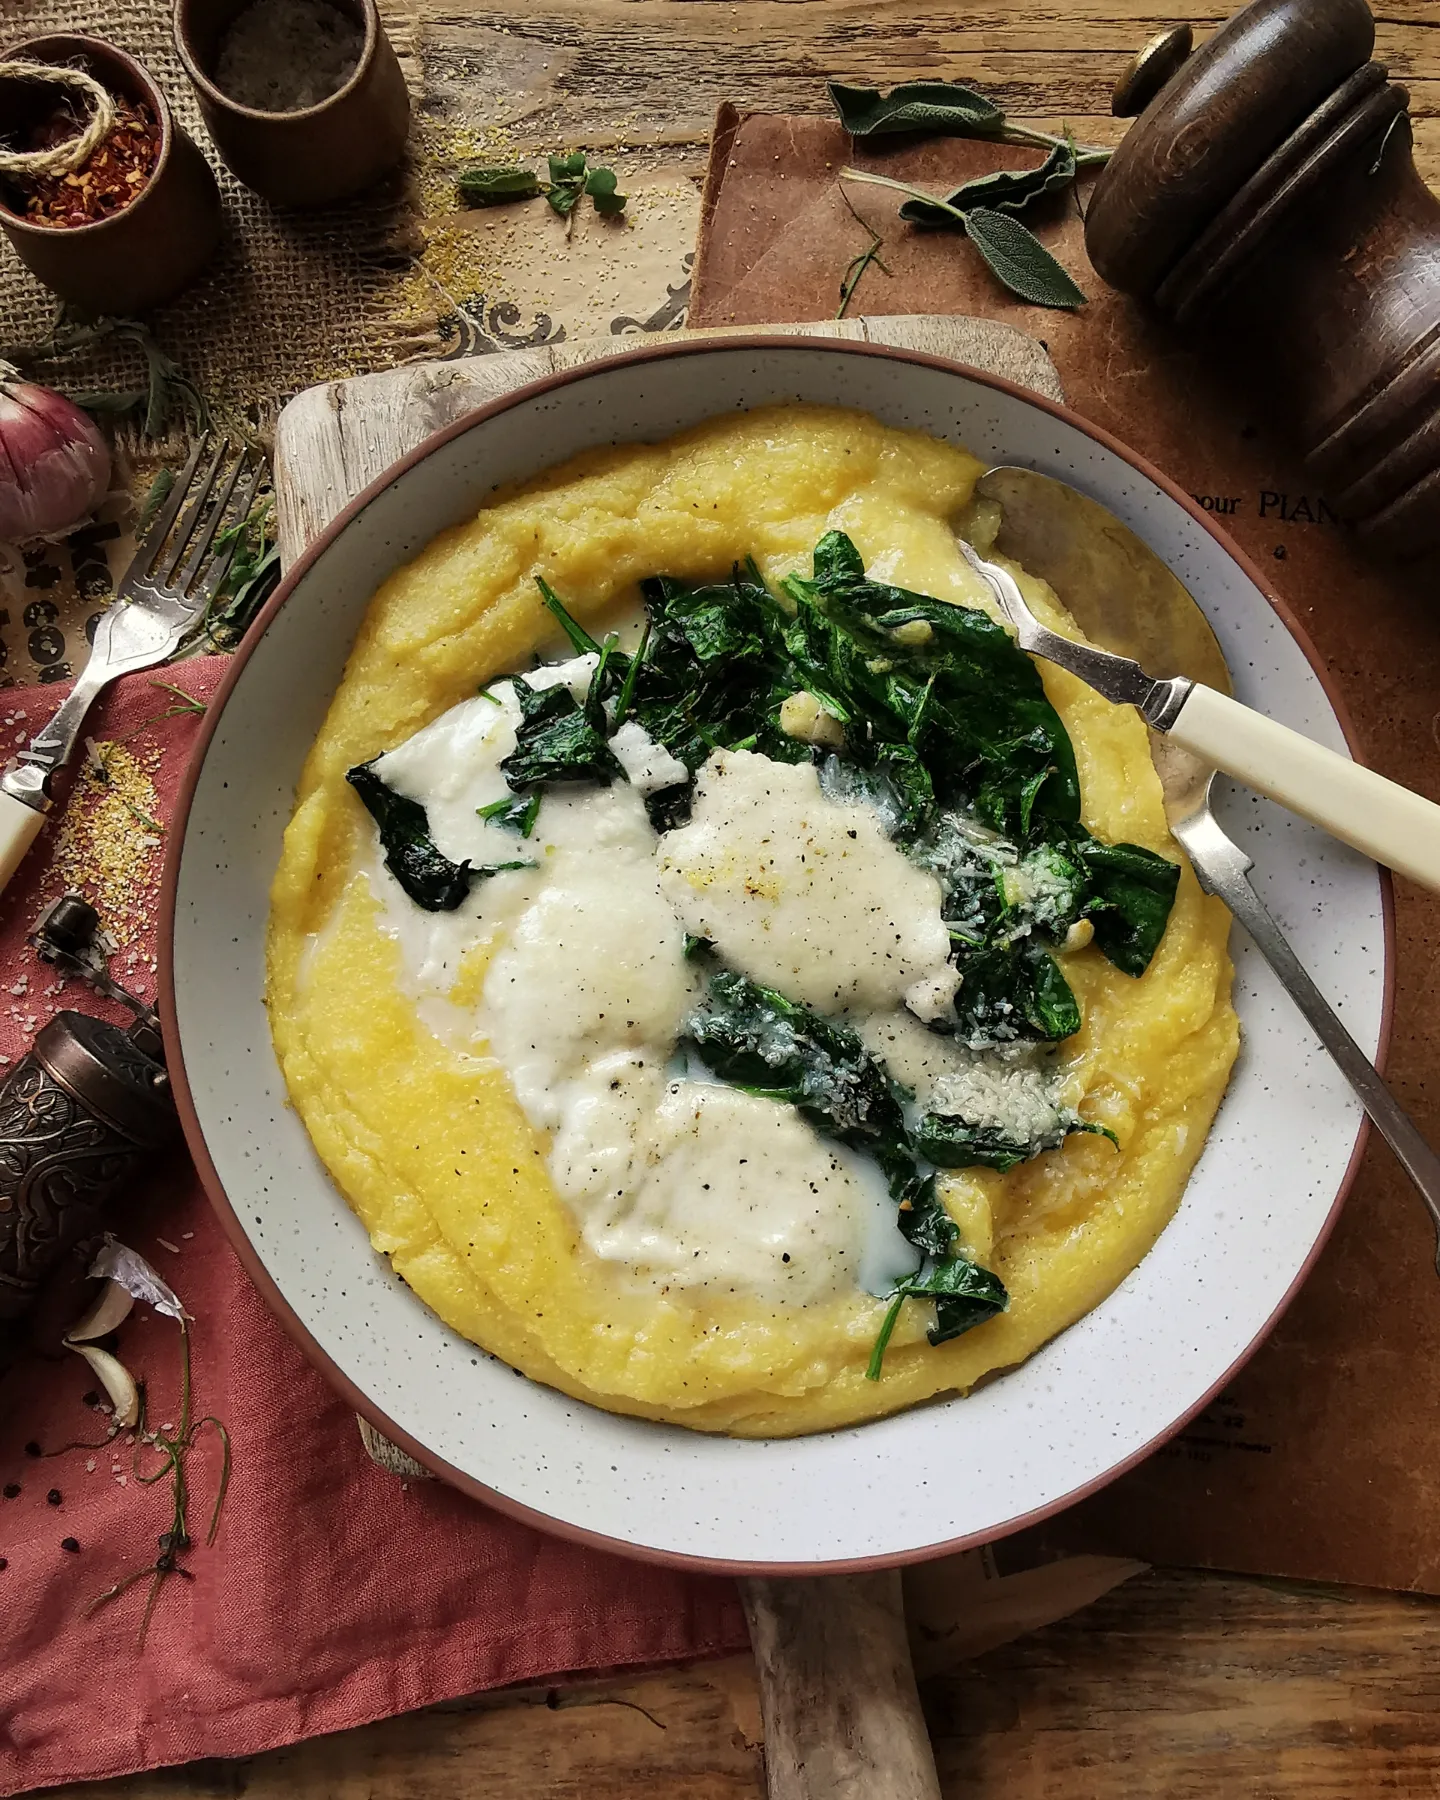 Garlic buttery spinach with burrata and polenta